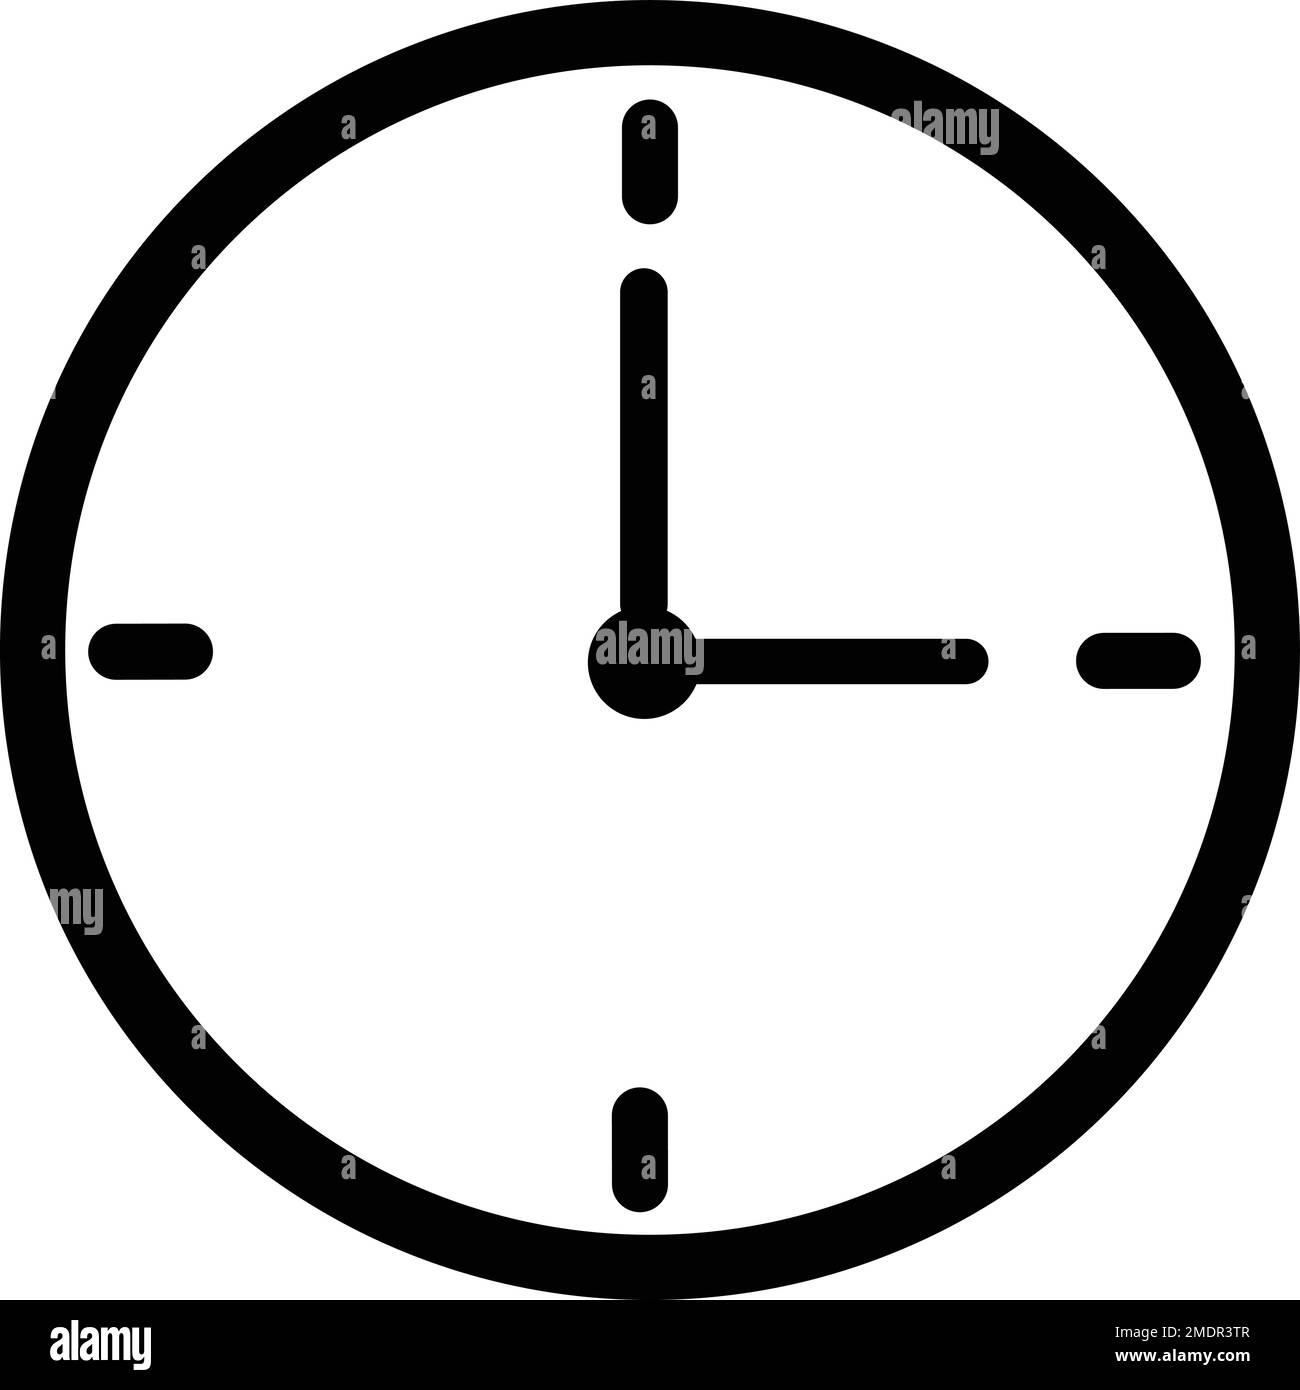 Simple time clock analog vector icon, Watch symbol Stock Vector